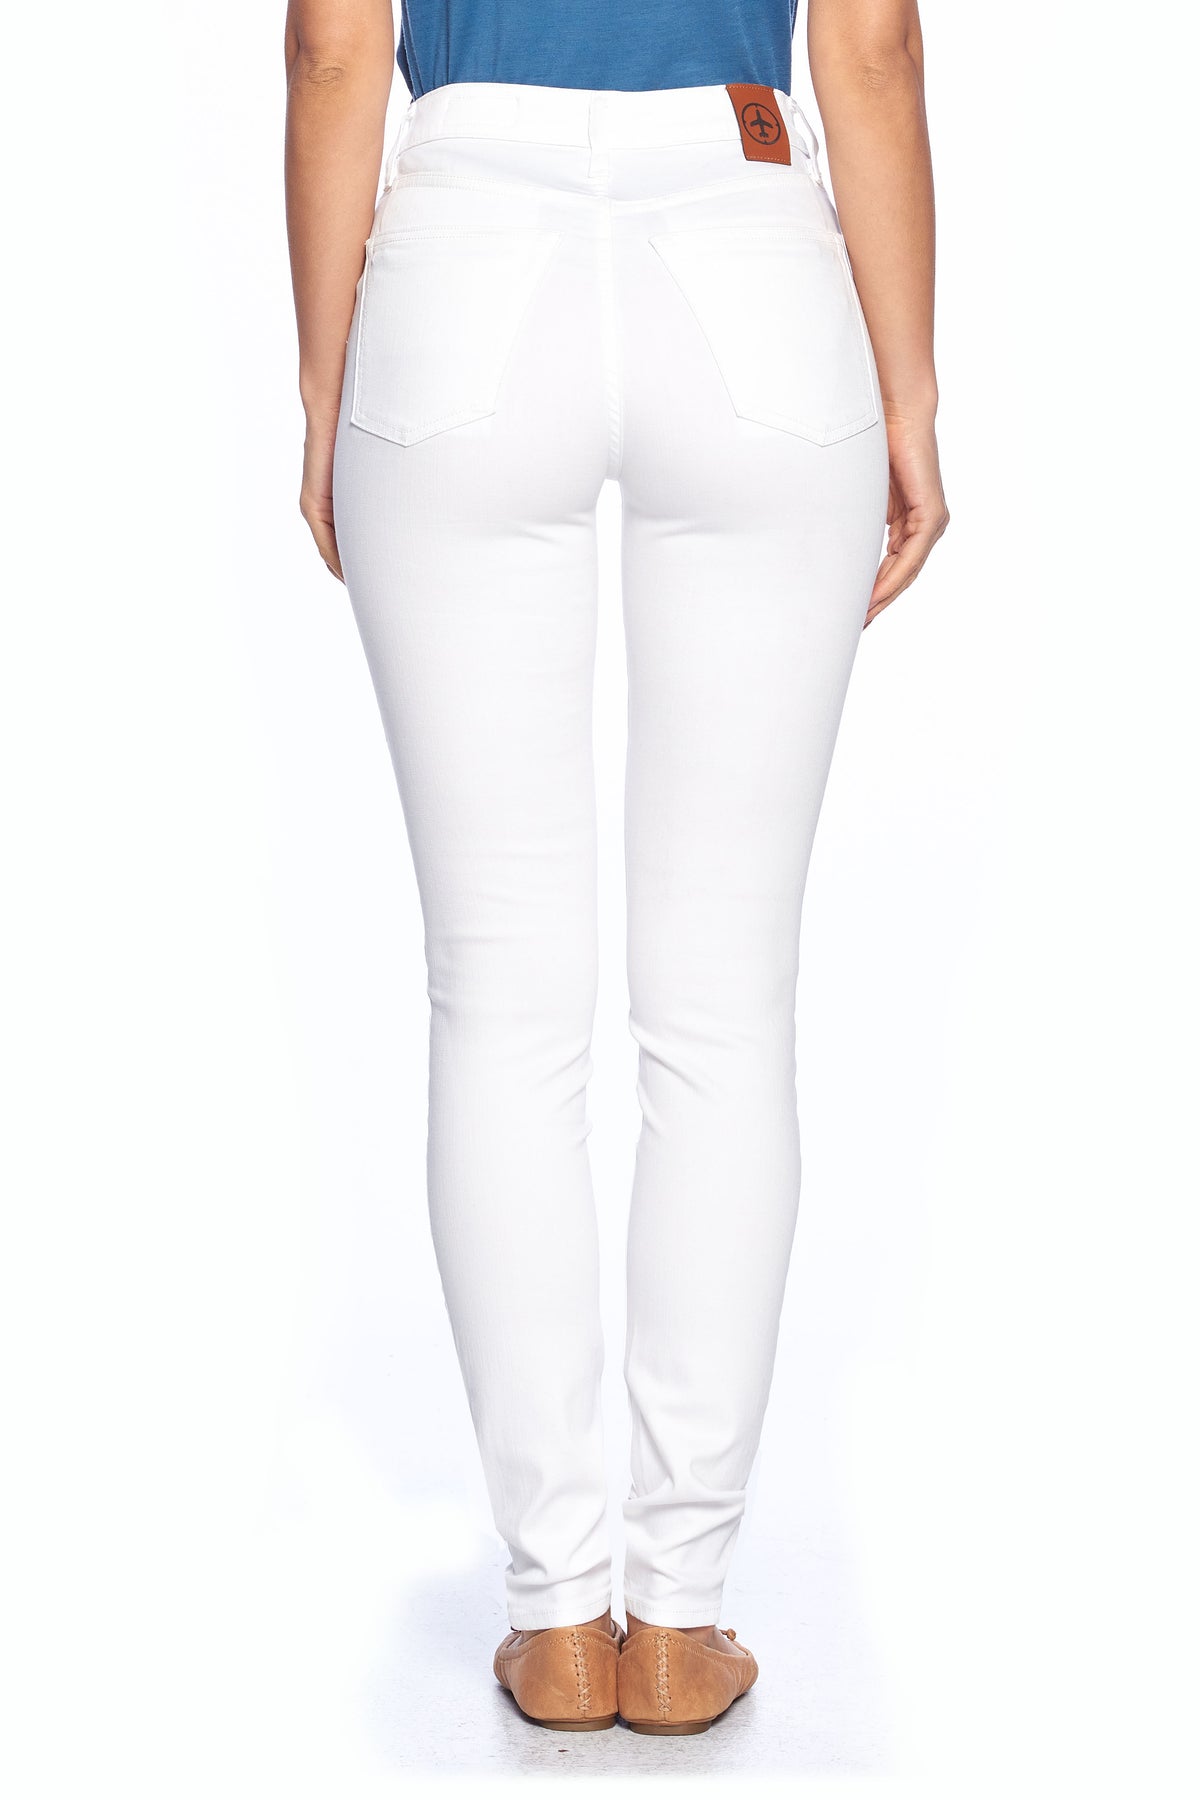 The Best Travel Jeans in the World for Women, Comfort Skinny, White ...